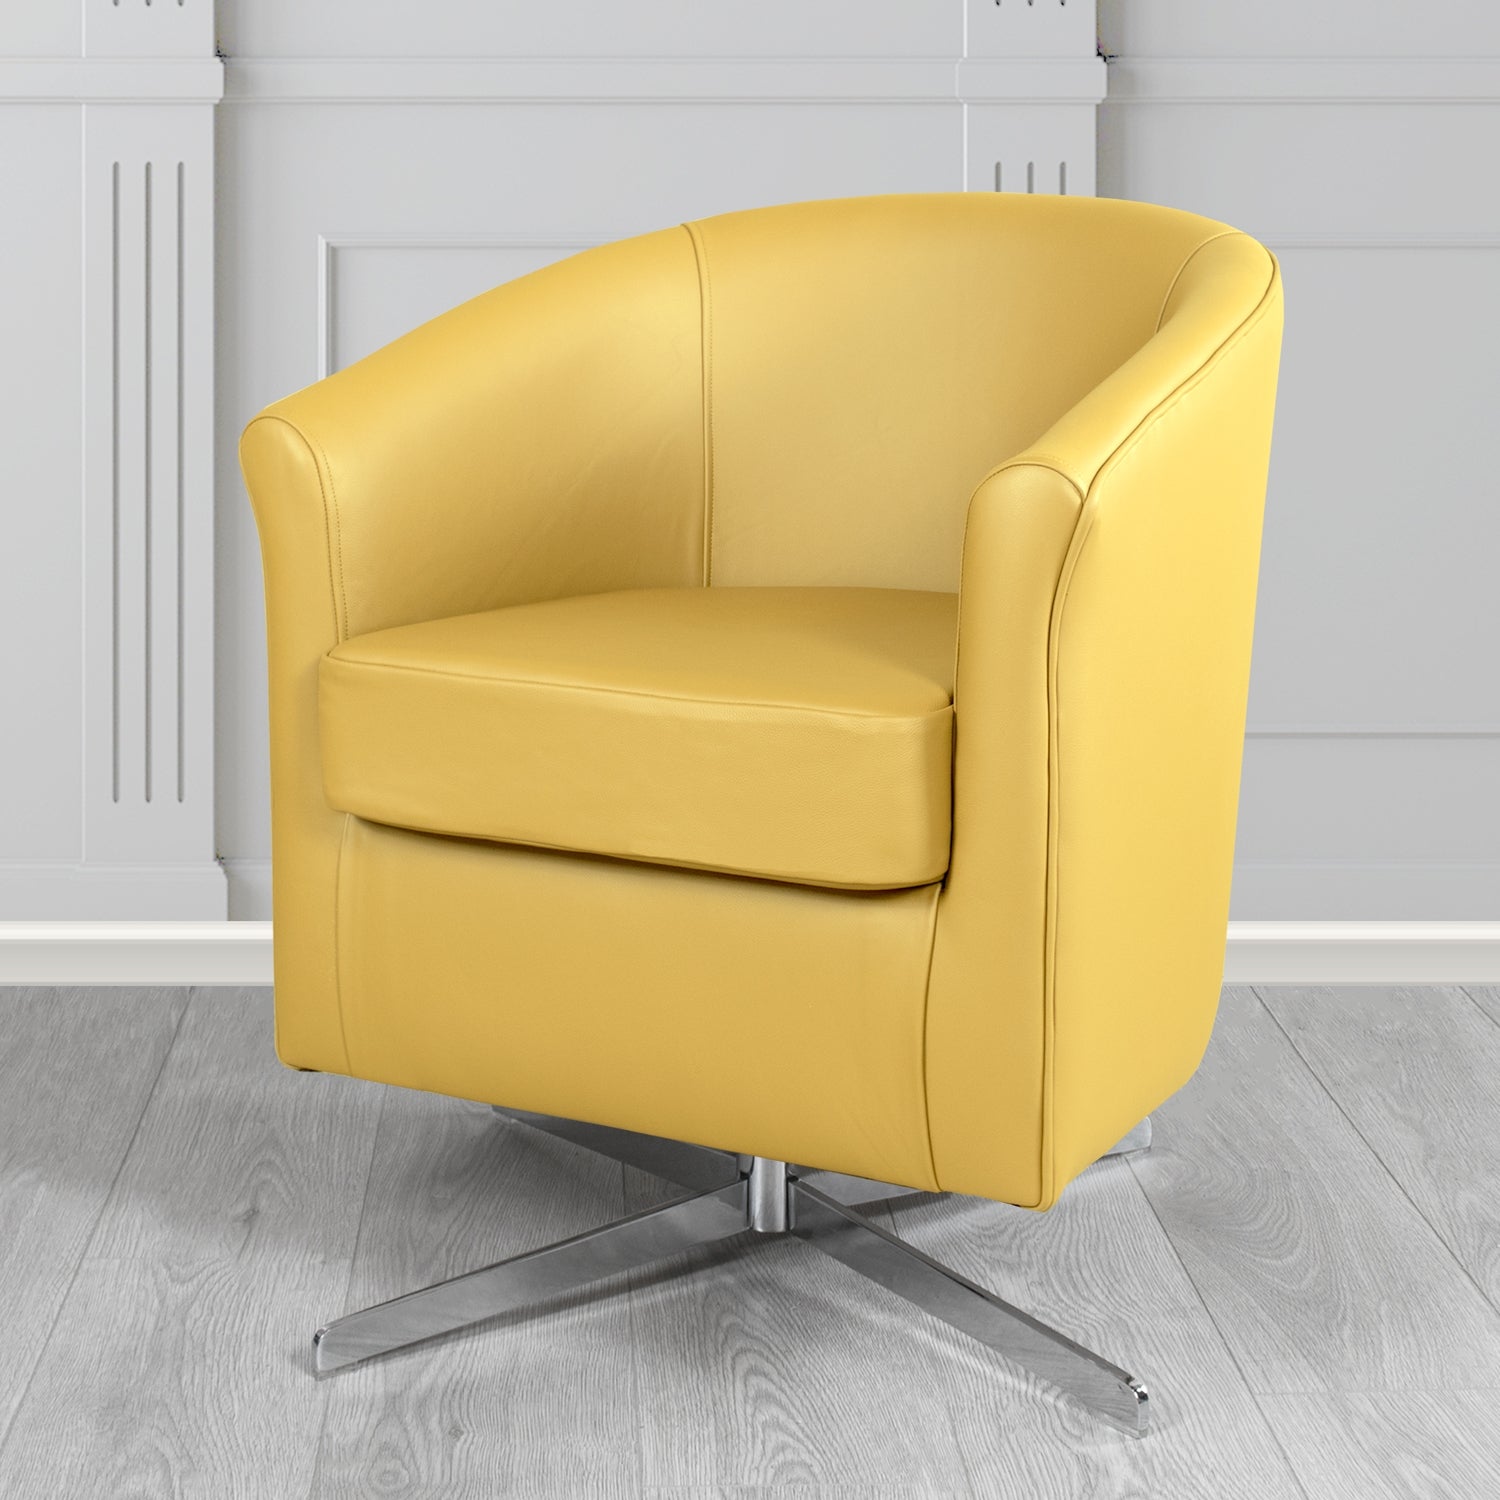 Cannes Swivel Tub Chair in Shelly Deluca Crib 5 Genuine Leather - The Tub Chair Shop